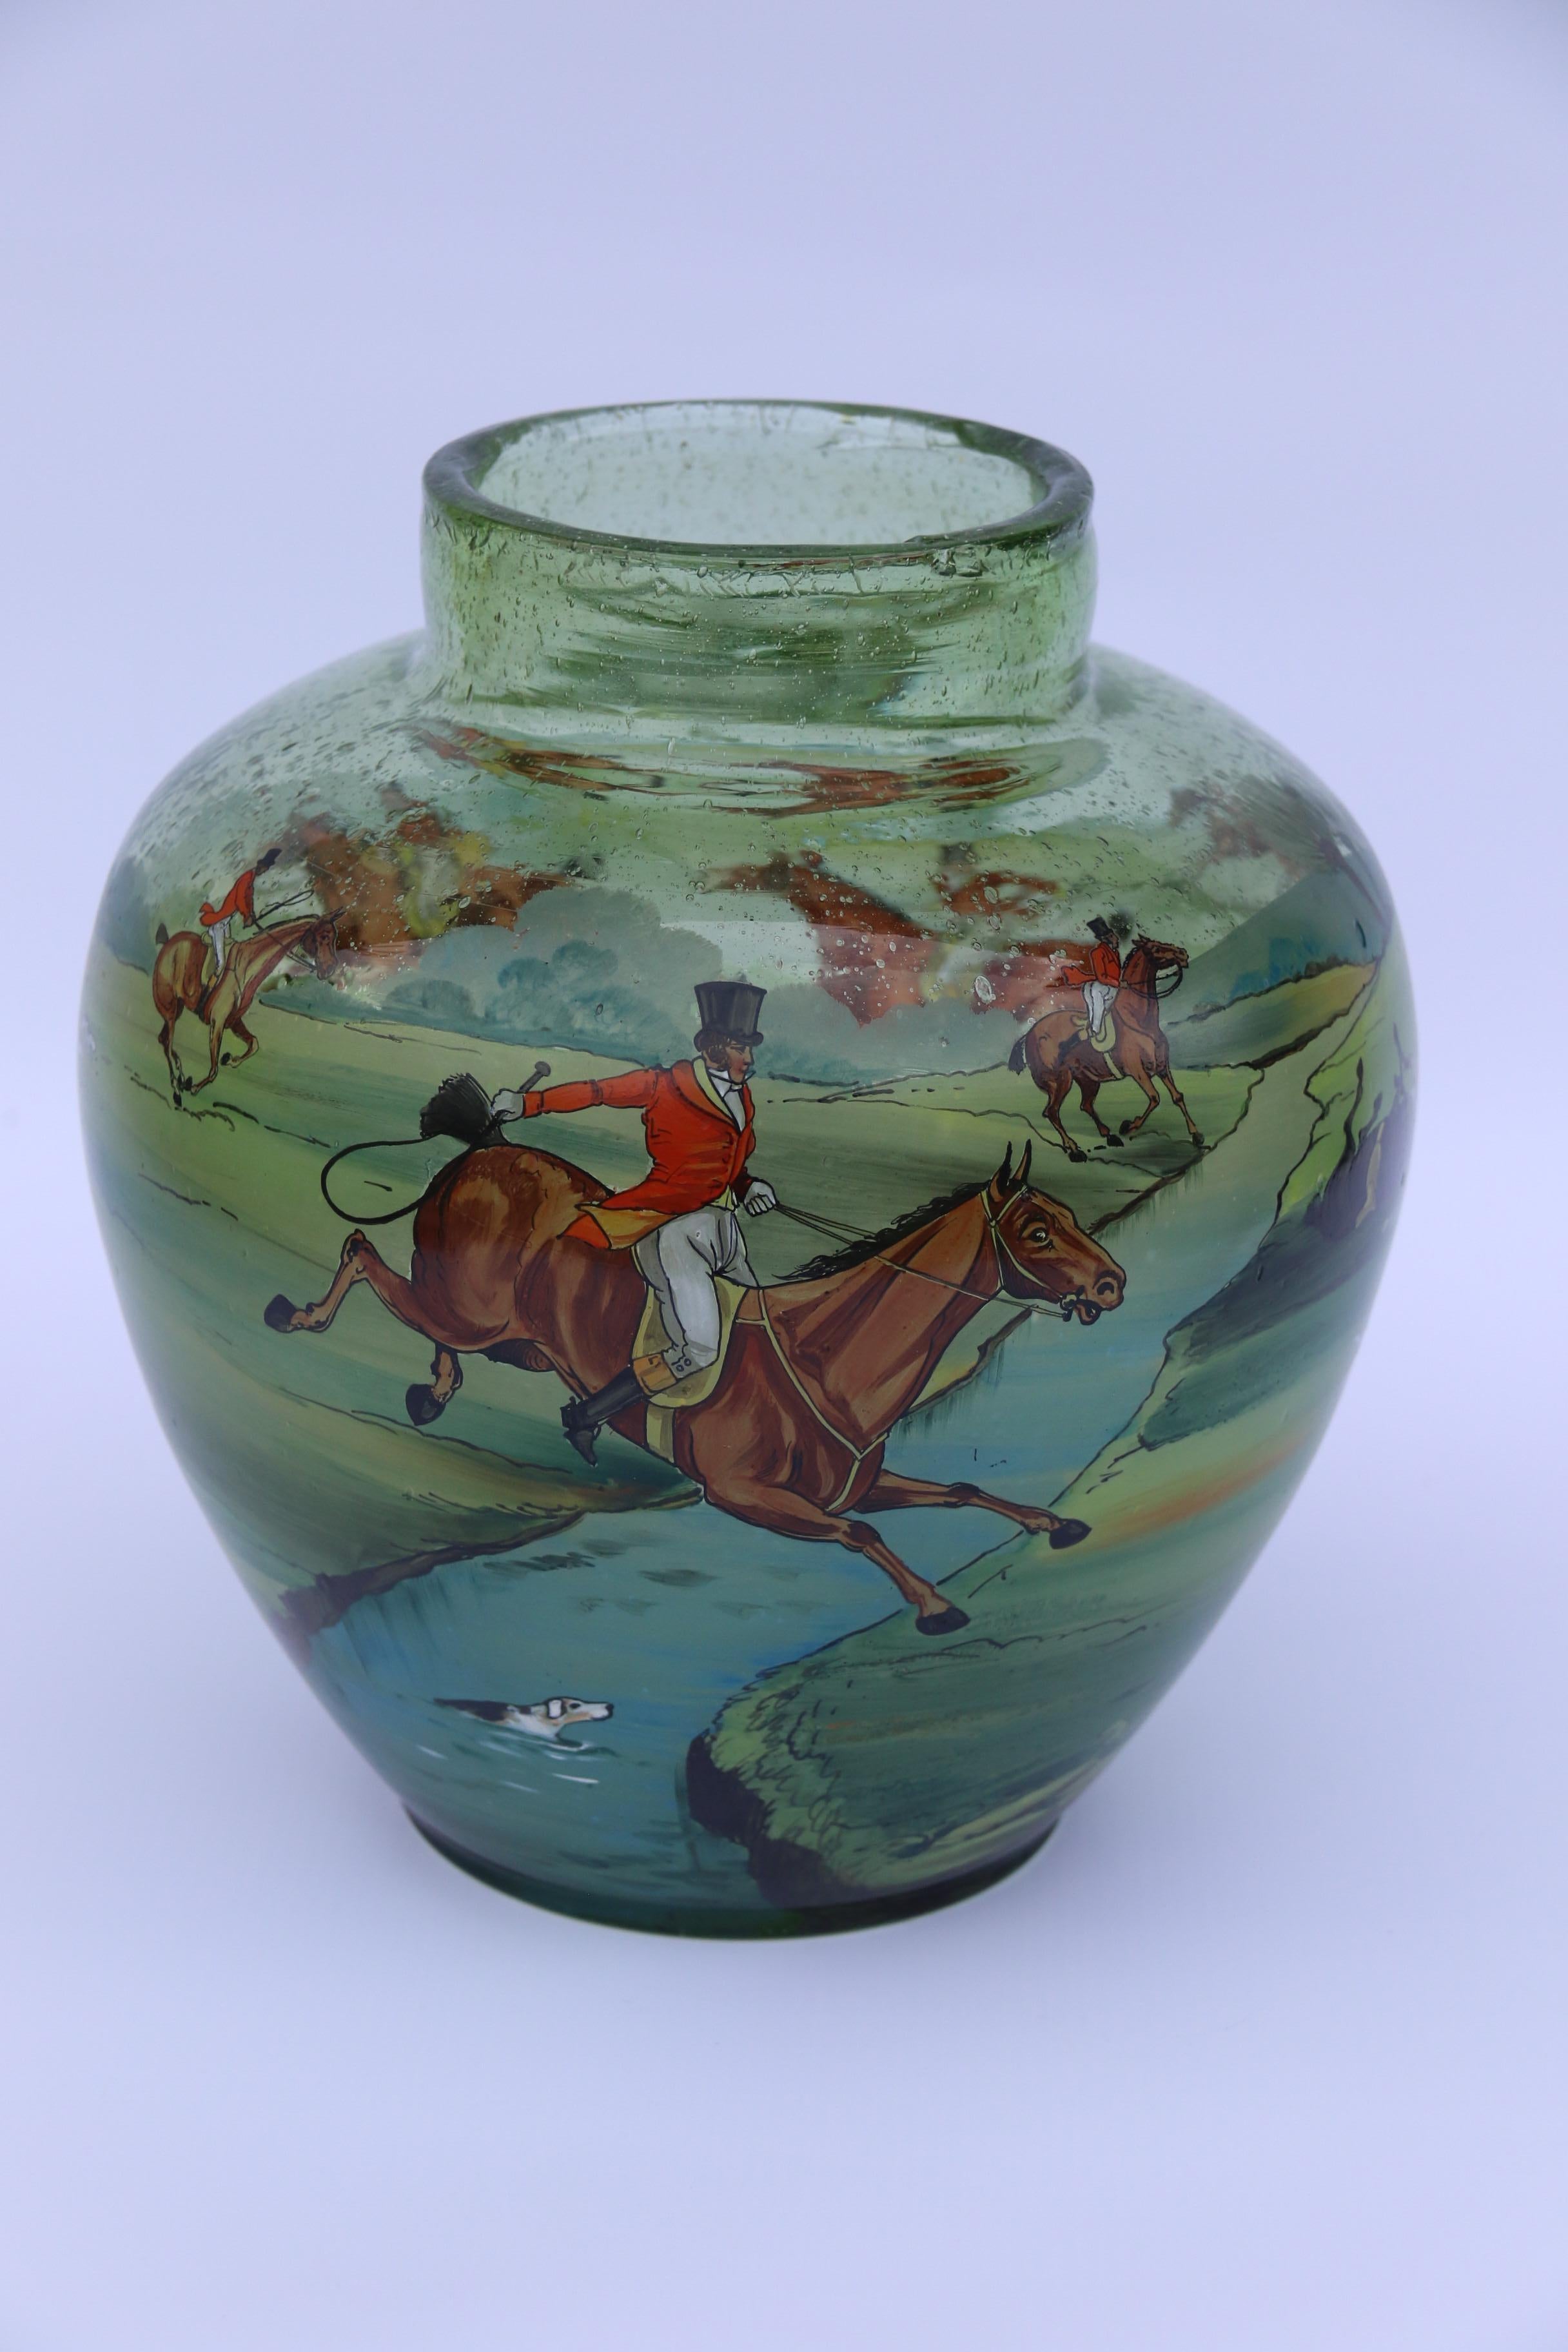 An outstanding large Bohemian hand blown green glass vase decorated with a superb hand painted enamelled fox hunting scene.

This rare and decorative large glass vase was produced in Bohemia circa 1920. It is hand blown in apple green thick glass